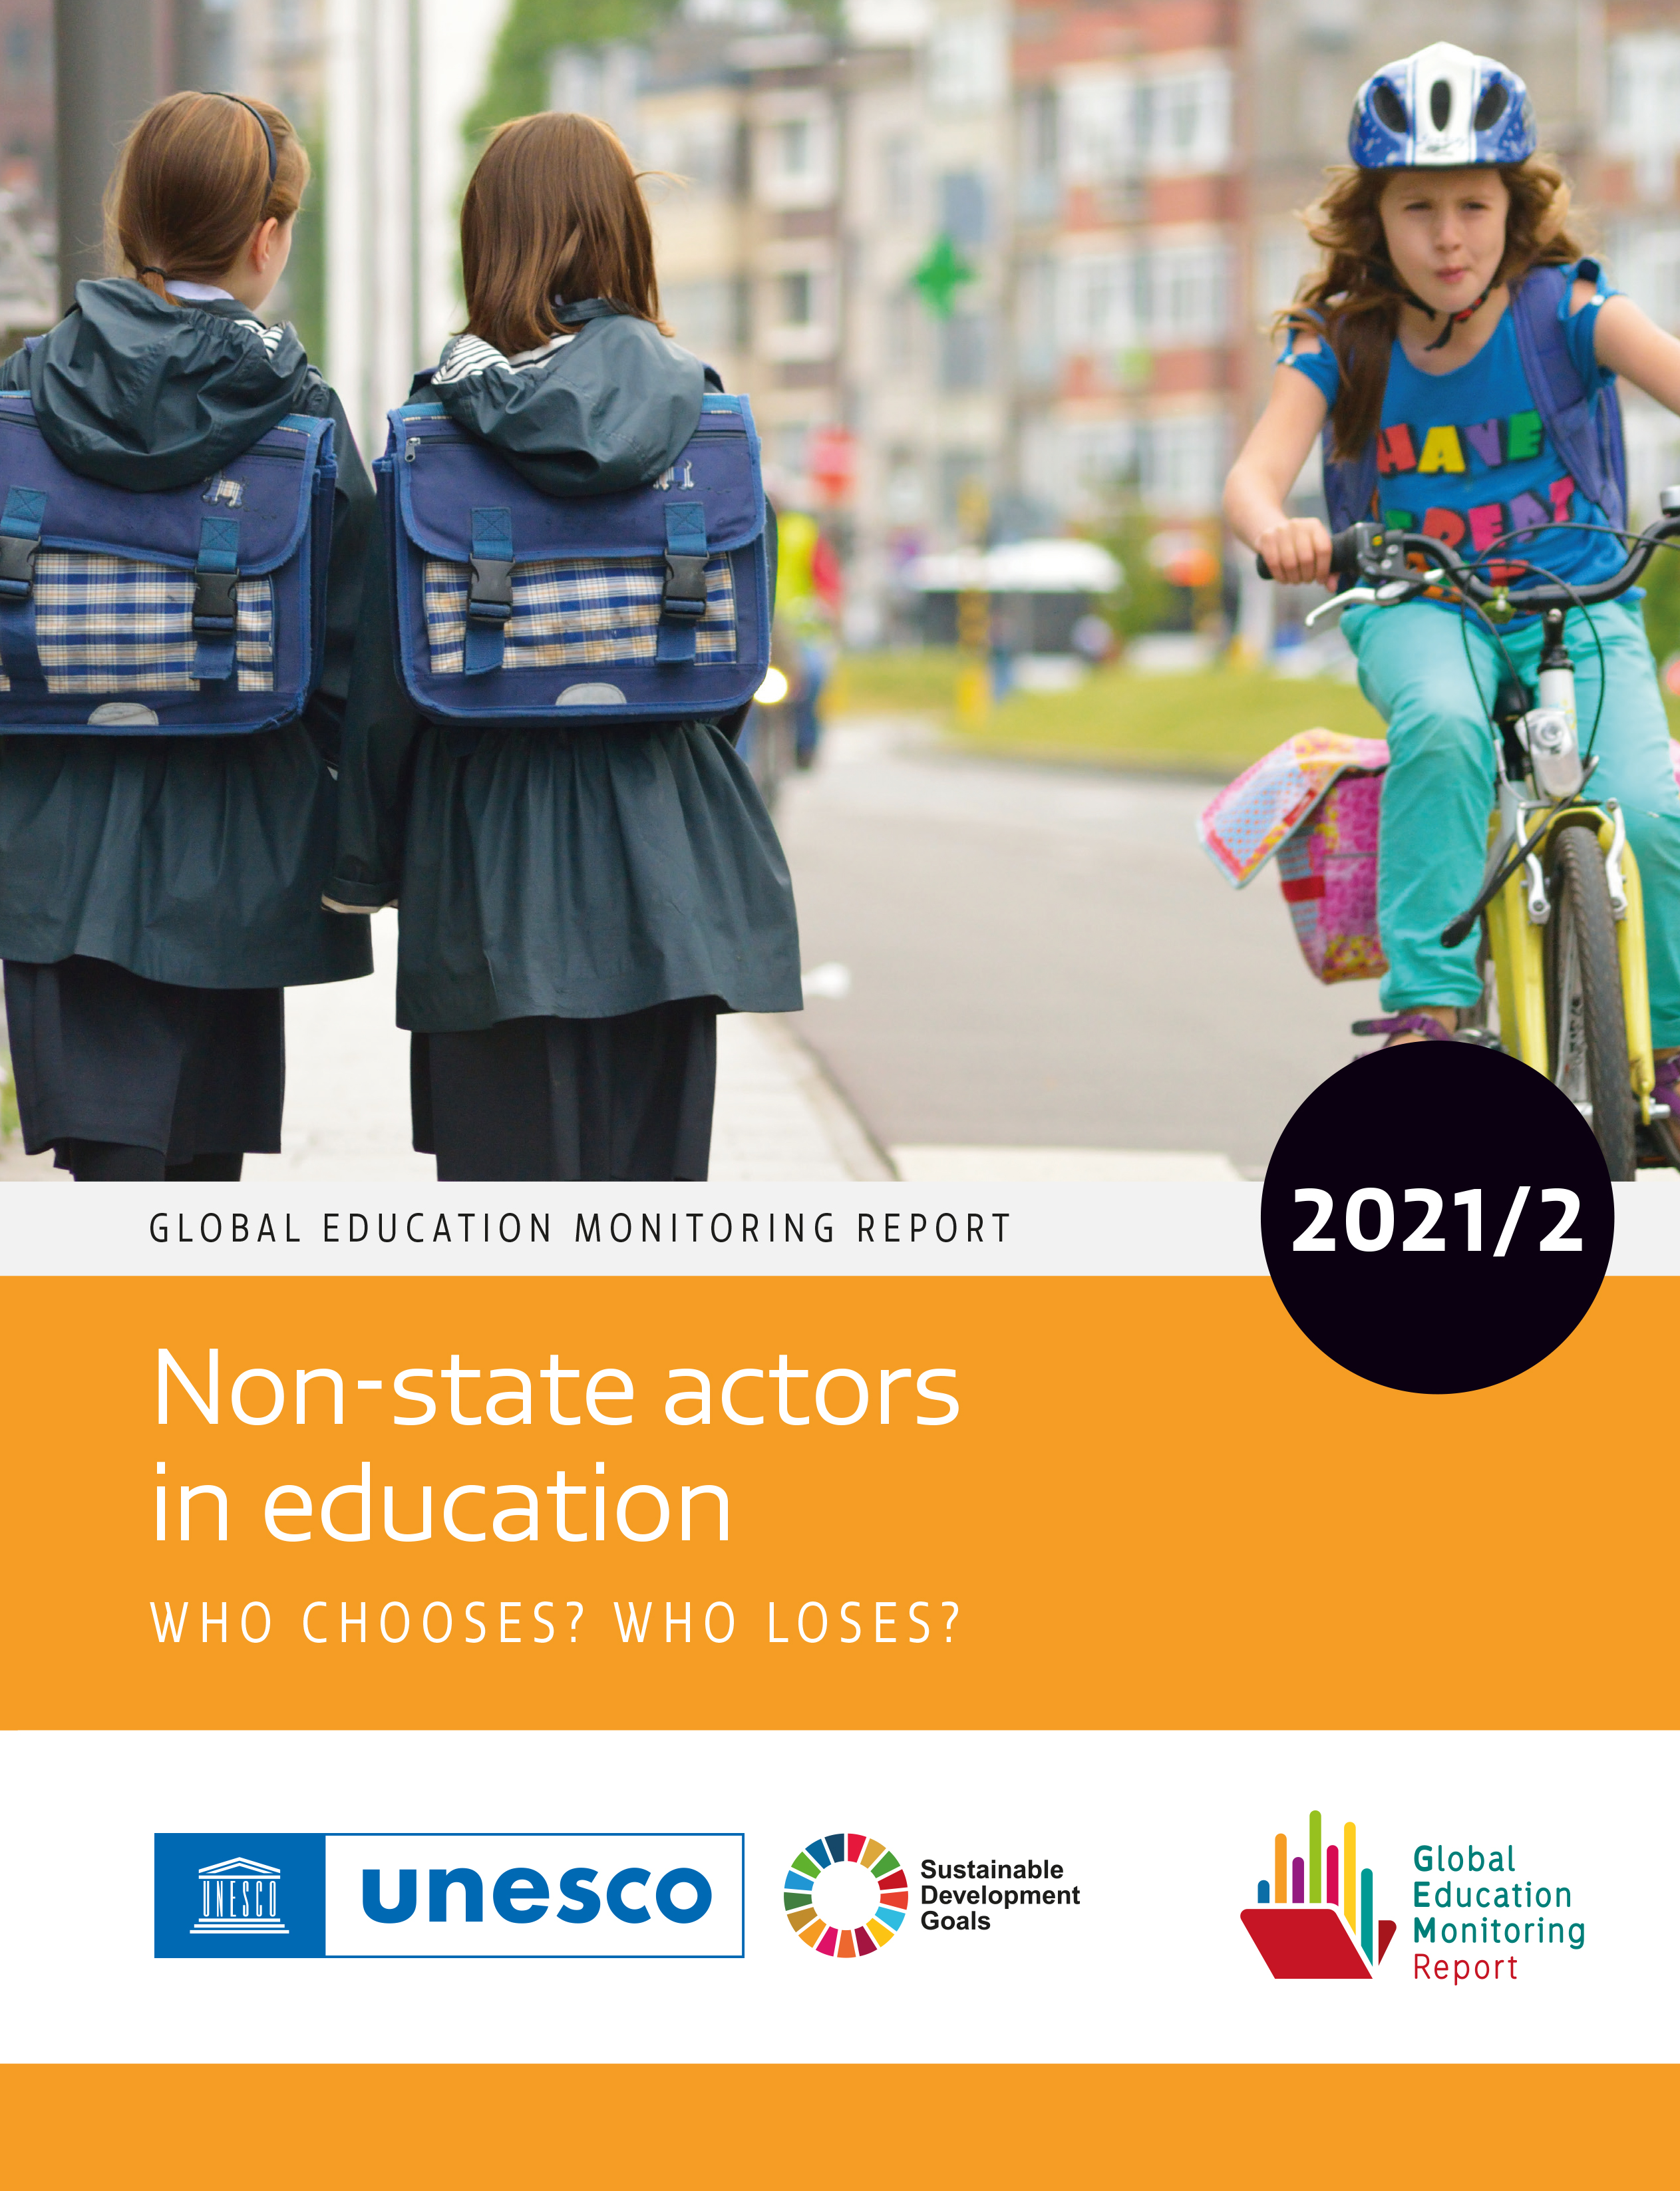 image of Global Education Monitoring Report 2021/2